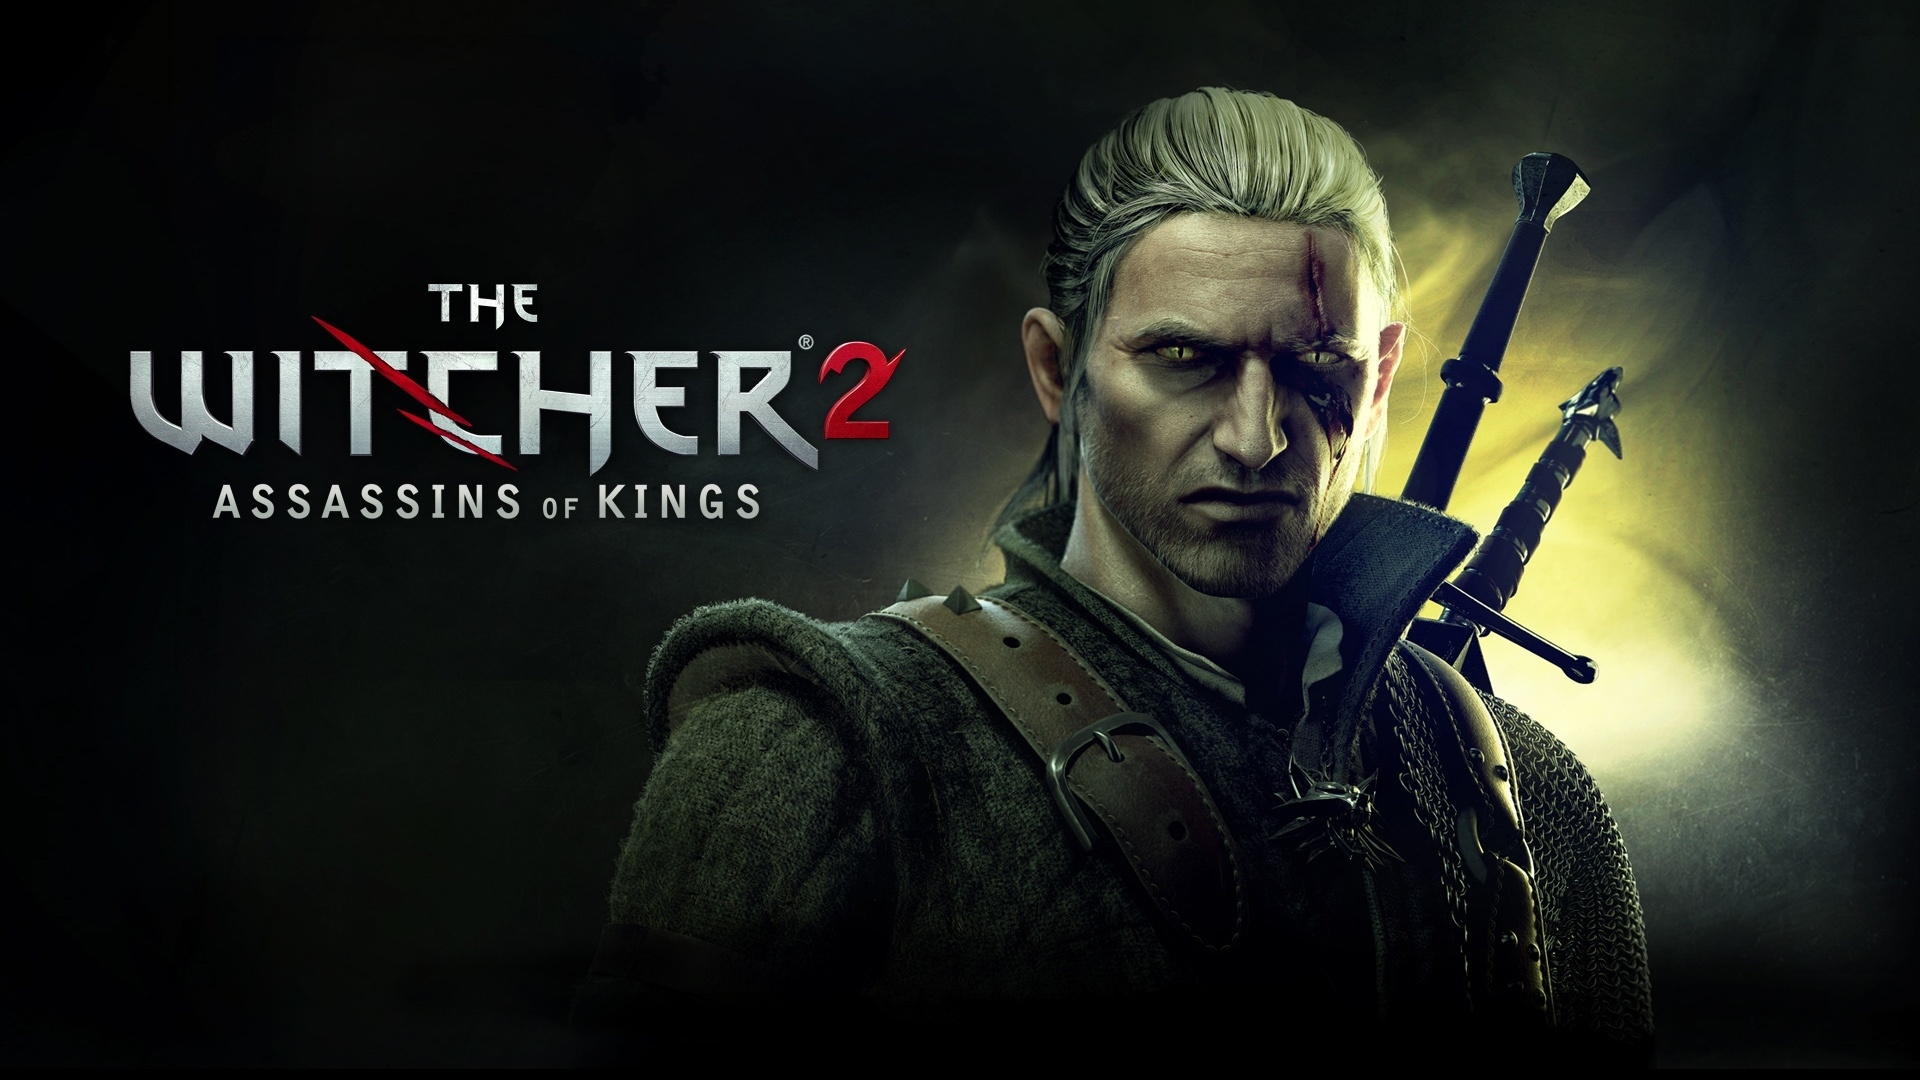 The Witcher 2 for 1920 x 1080 HDTV 1080p resolution